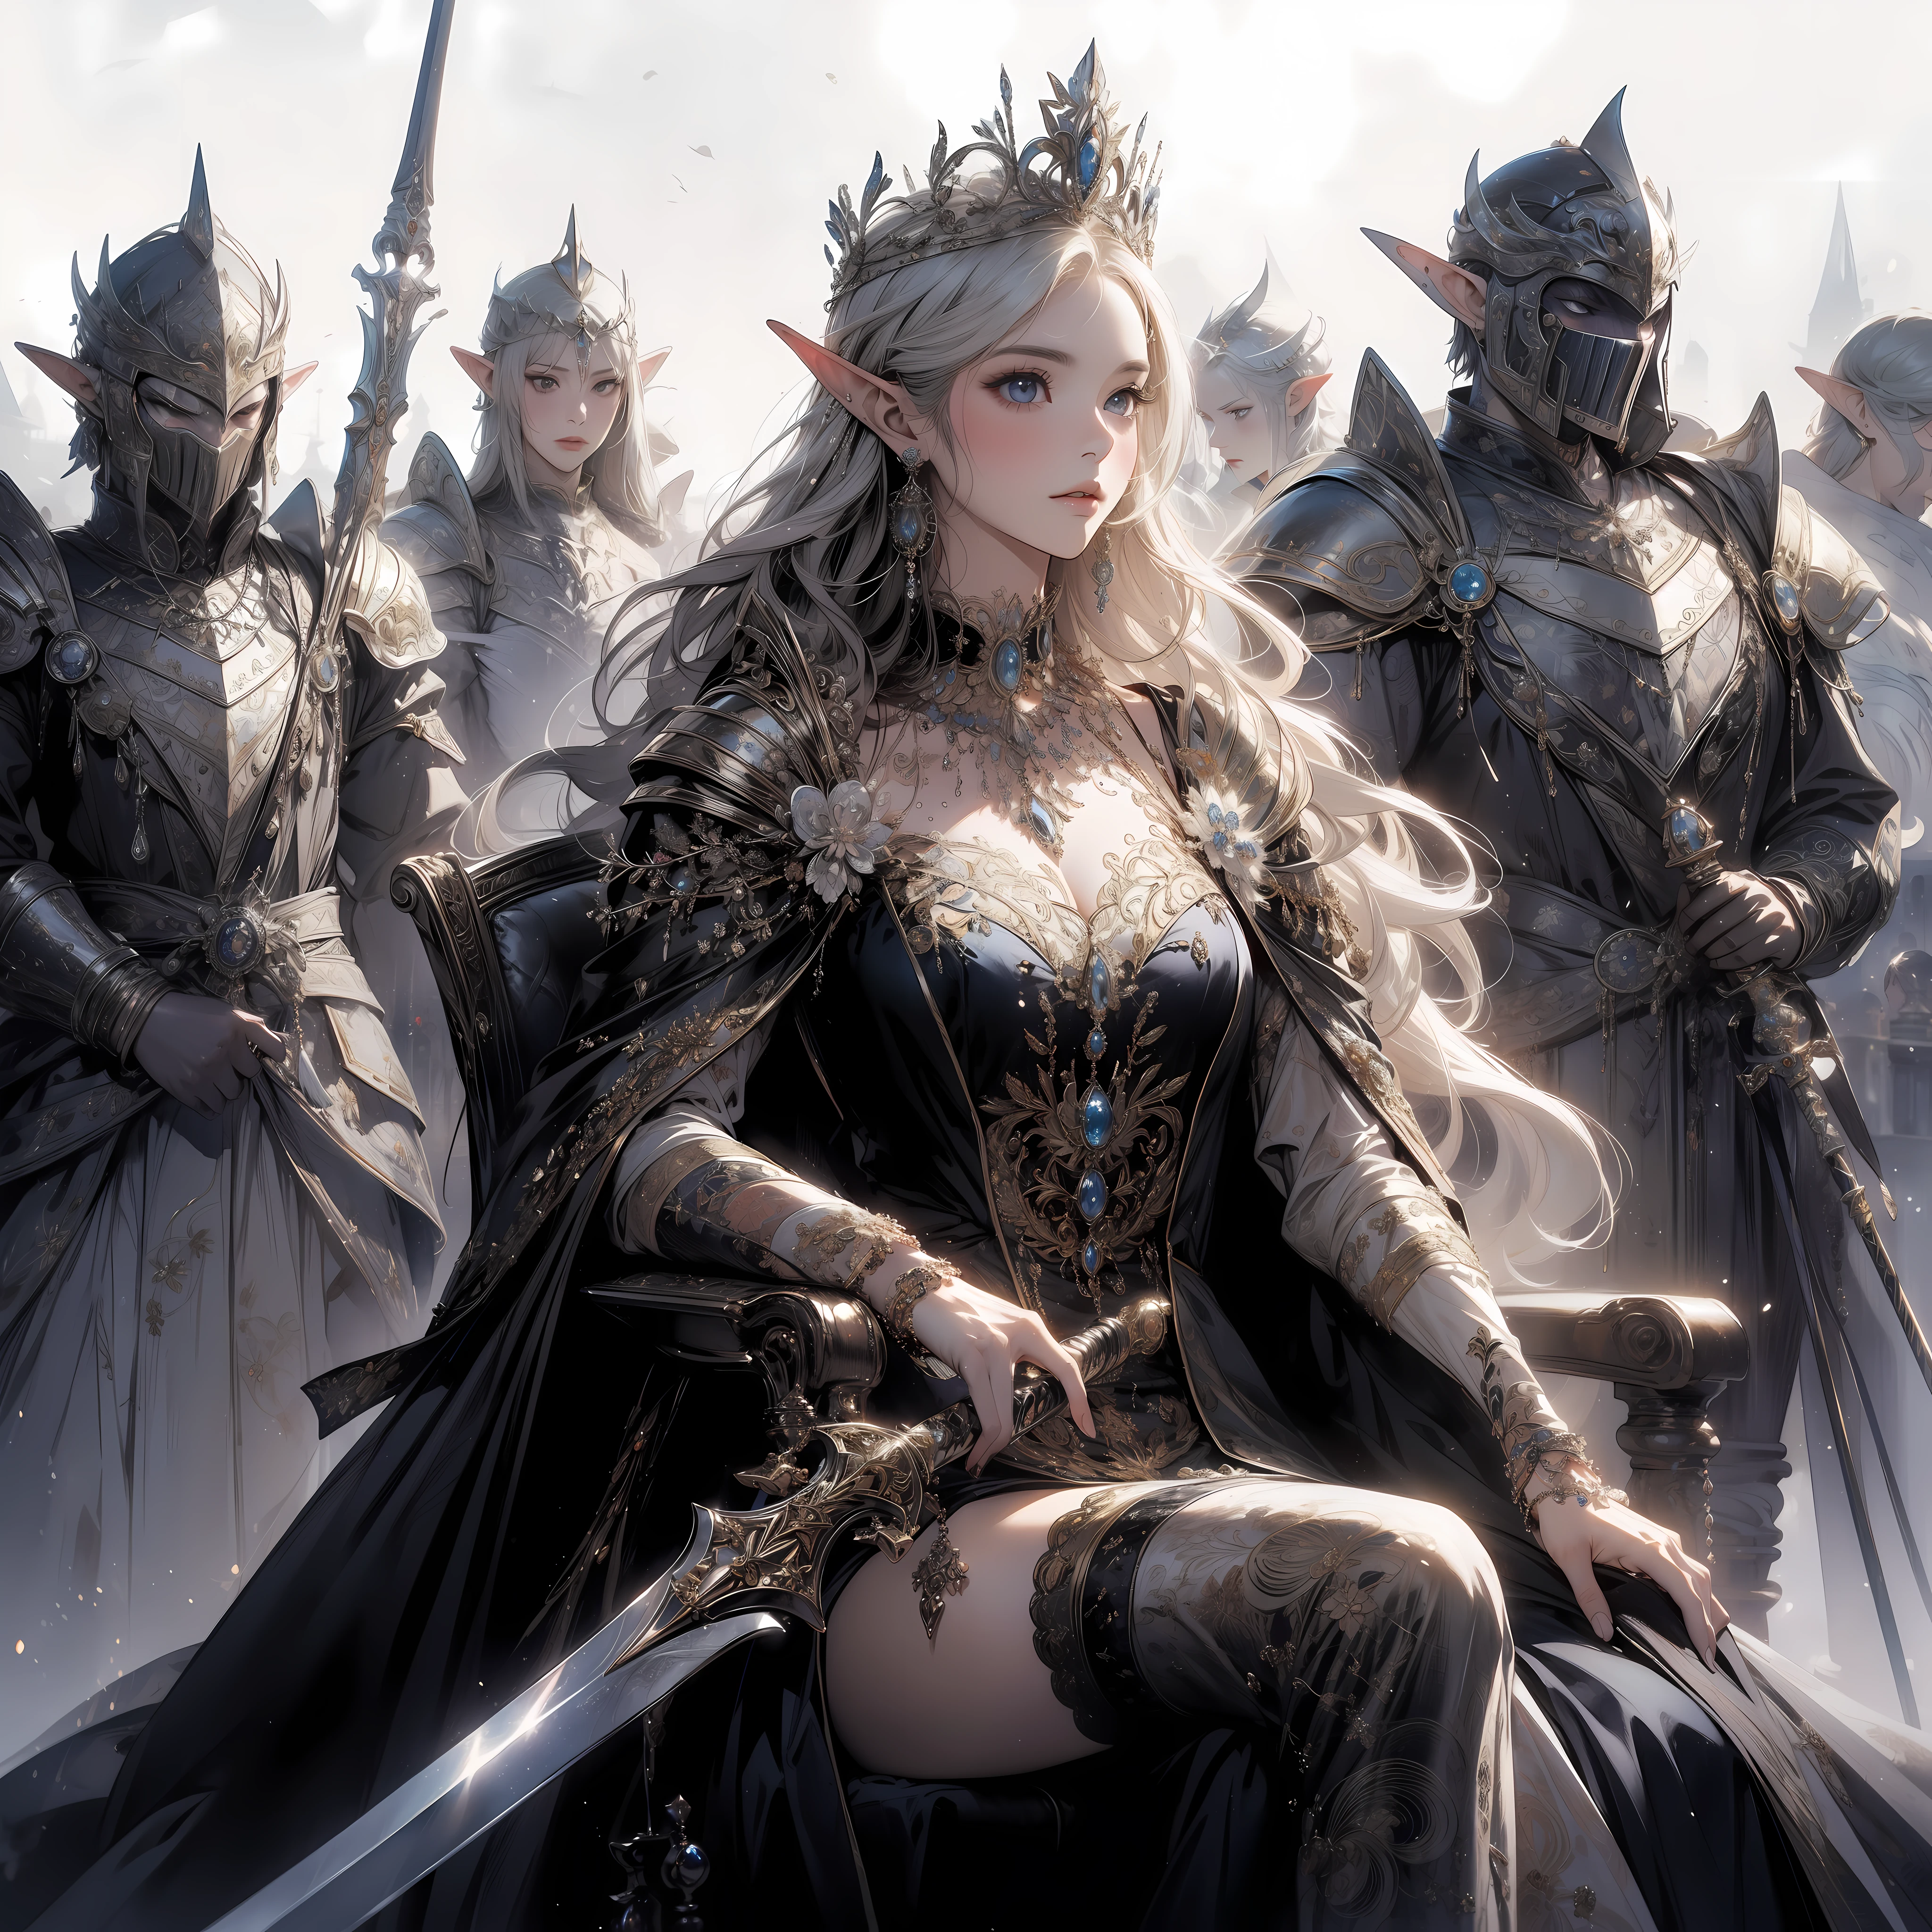 Seated in regal splendor, the elven queen exudes majesty and authority, her royal regalia and crown symbolizing her leadership. With determination, she holding a sword, while her devoted aides, dressed in knightly attire, stand vigilantly by her side, by Artgem, Dynamic shot, Dynamic pose, by Yoshitaka Amano, Mikimoto Haruhiko, frank frazetta, Cinematic Dramatic atmosphere, dark atmosfer, fantasy, 8k, watercolor painting